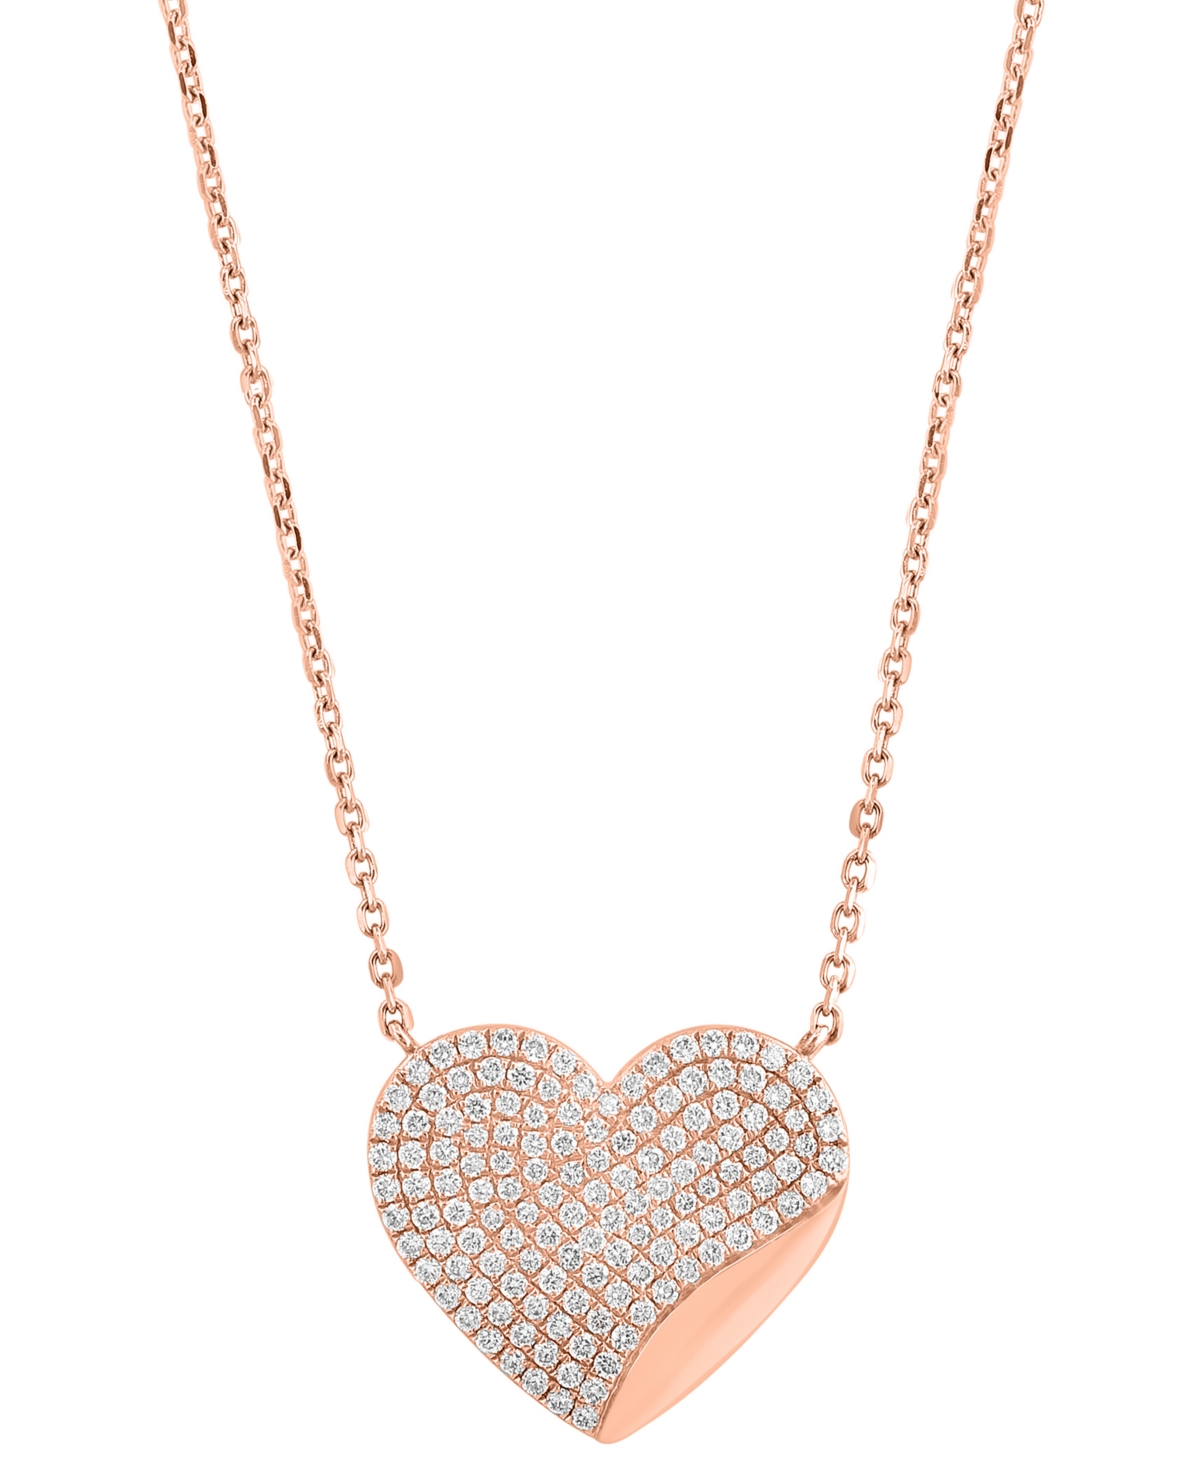 Effy Collection Effy Diamond Pave Heart Pendant Necklace (1/2 Ct. T.w.) In 14k Rose Gold, 16" + 2" Extender